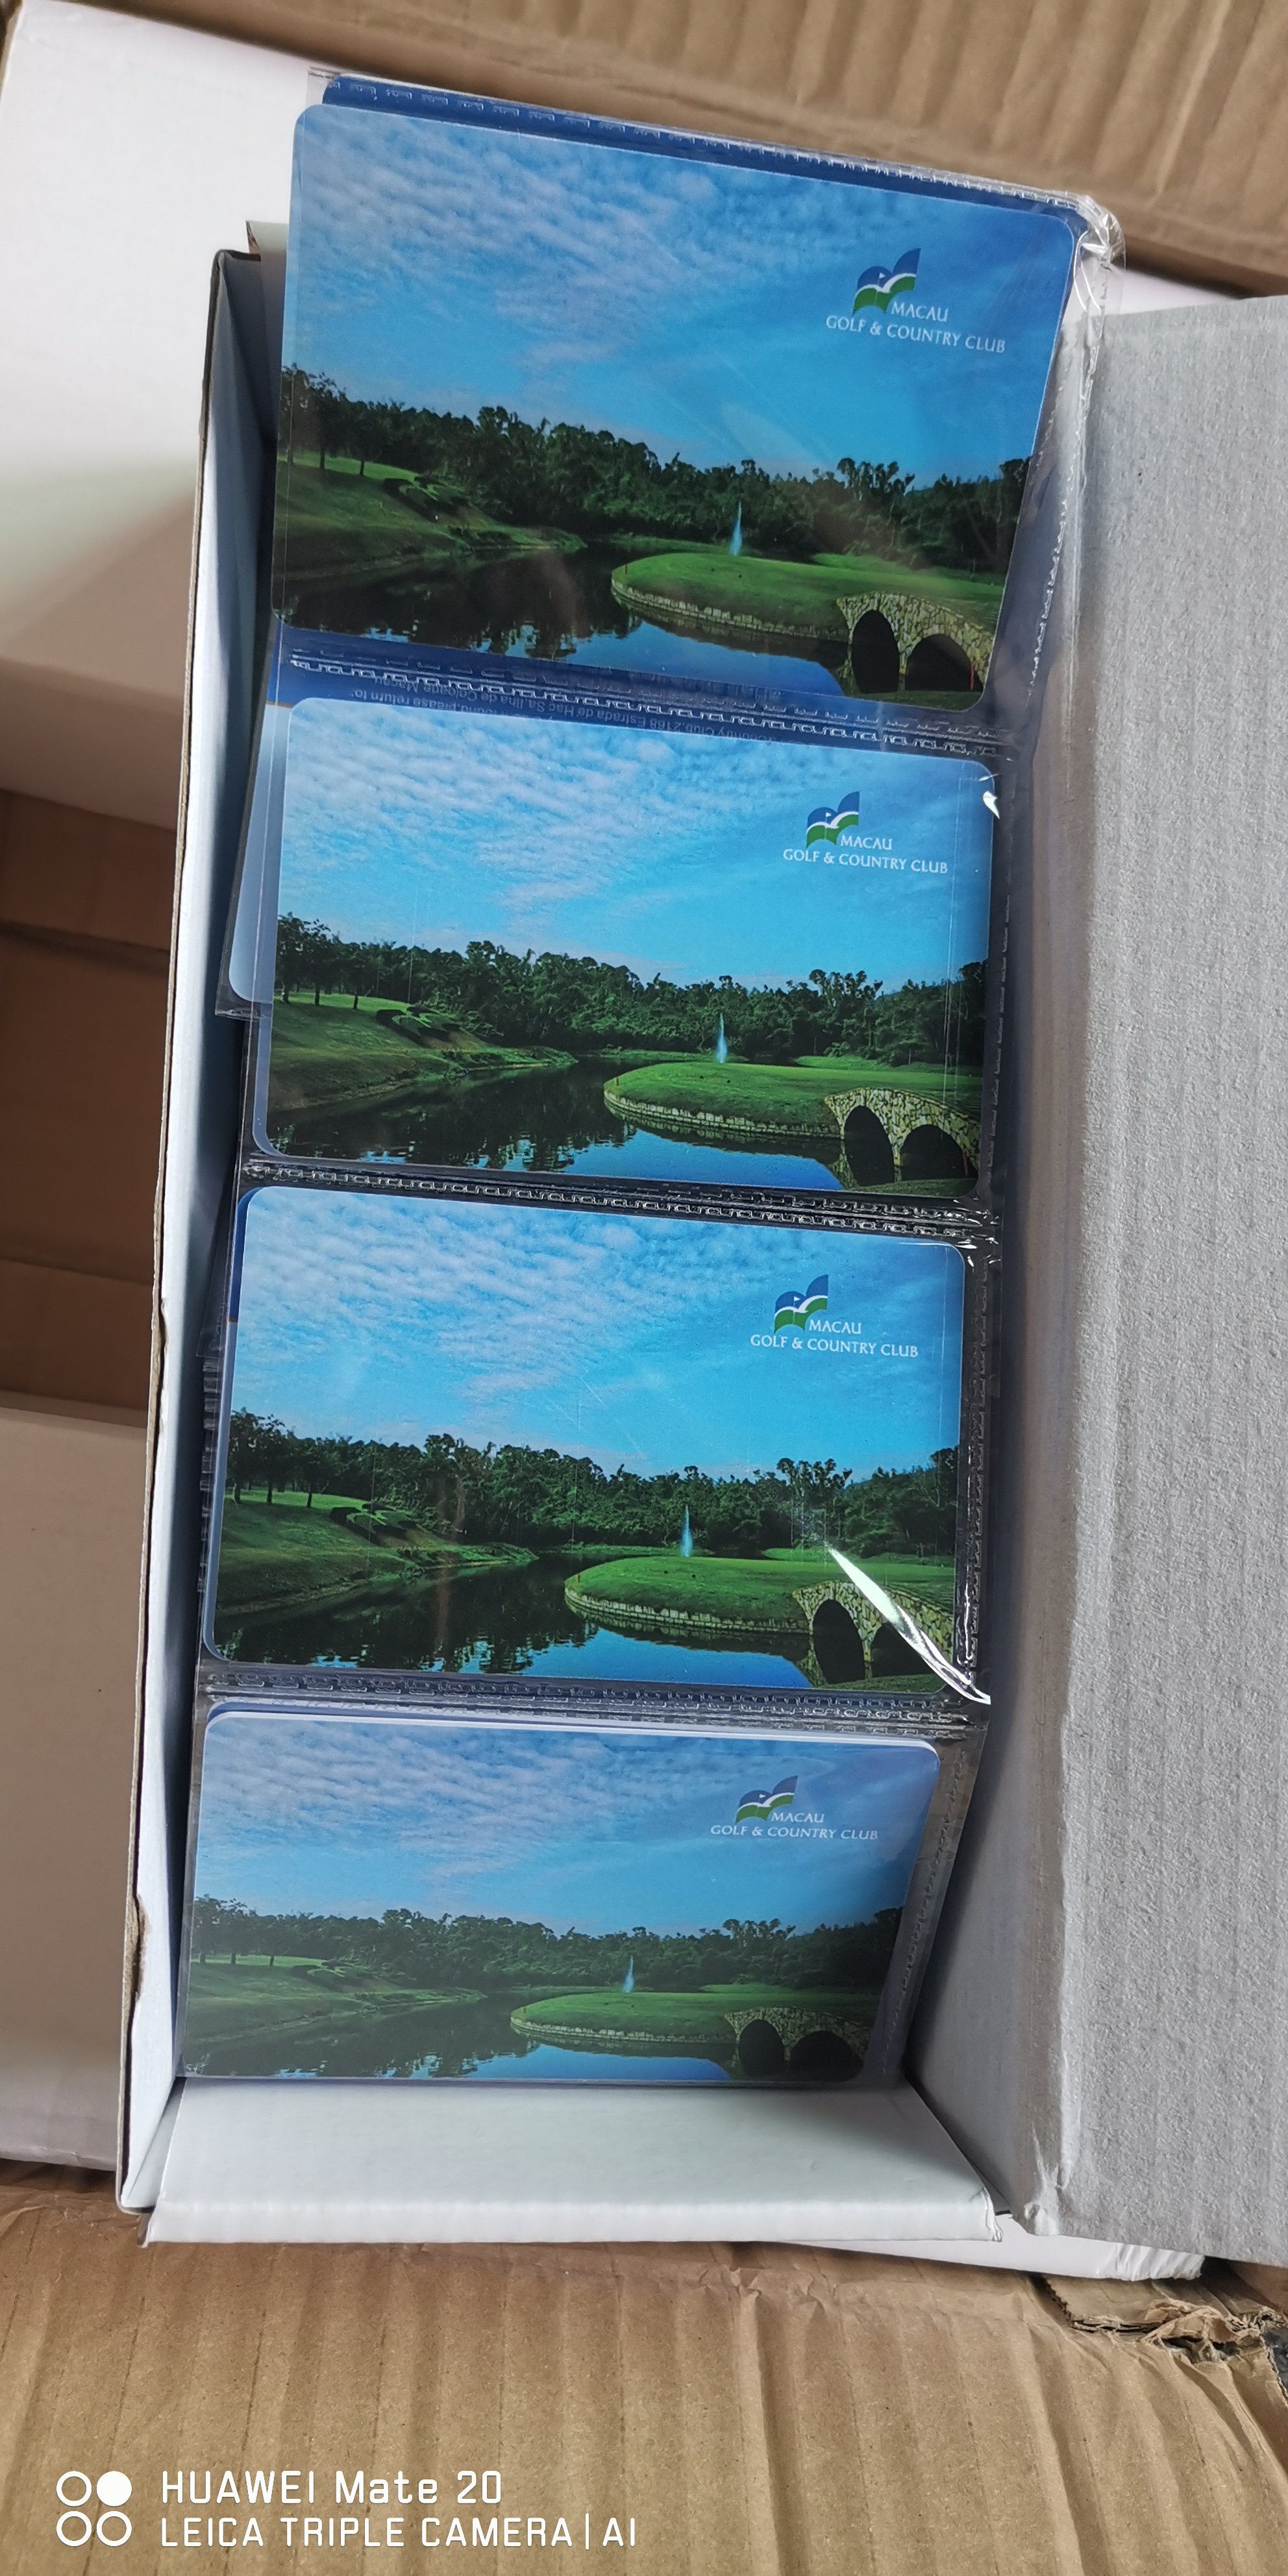 Excelsoo Cases Reference: Macau Golf & Country Club Long Range UHF Parking System Card for VIP Membership-1